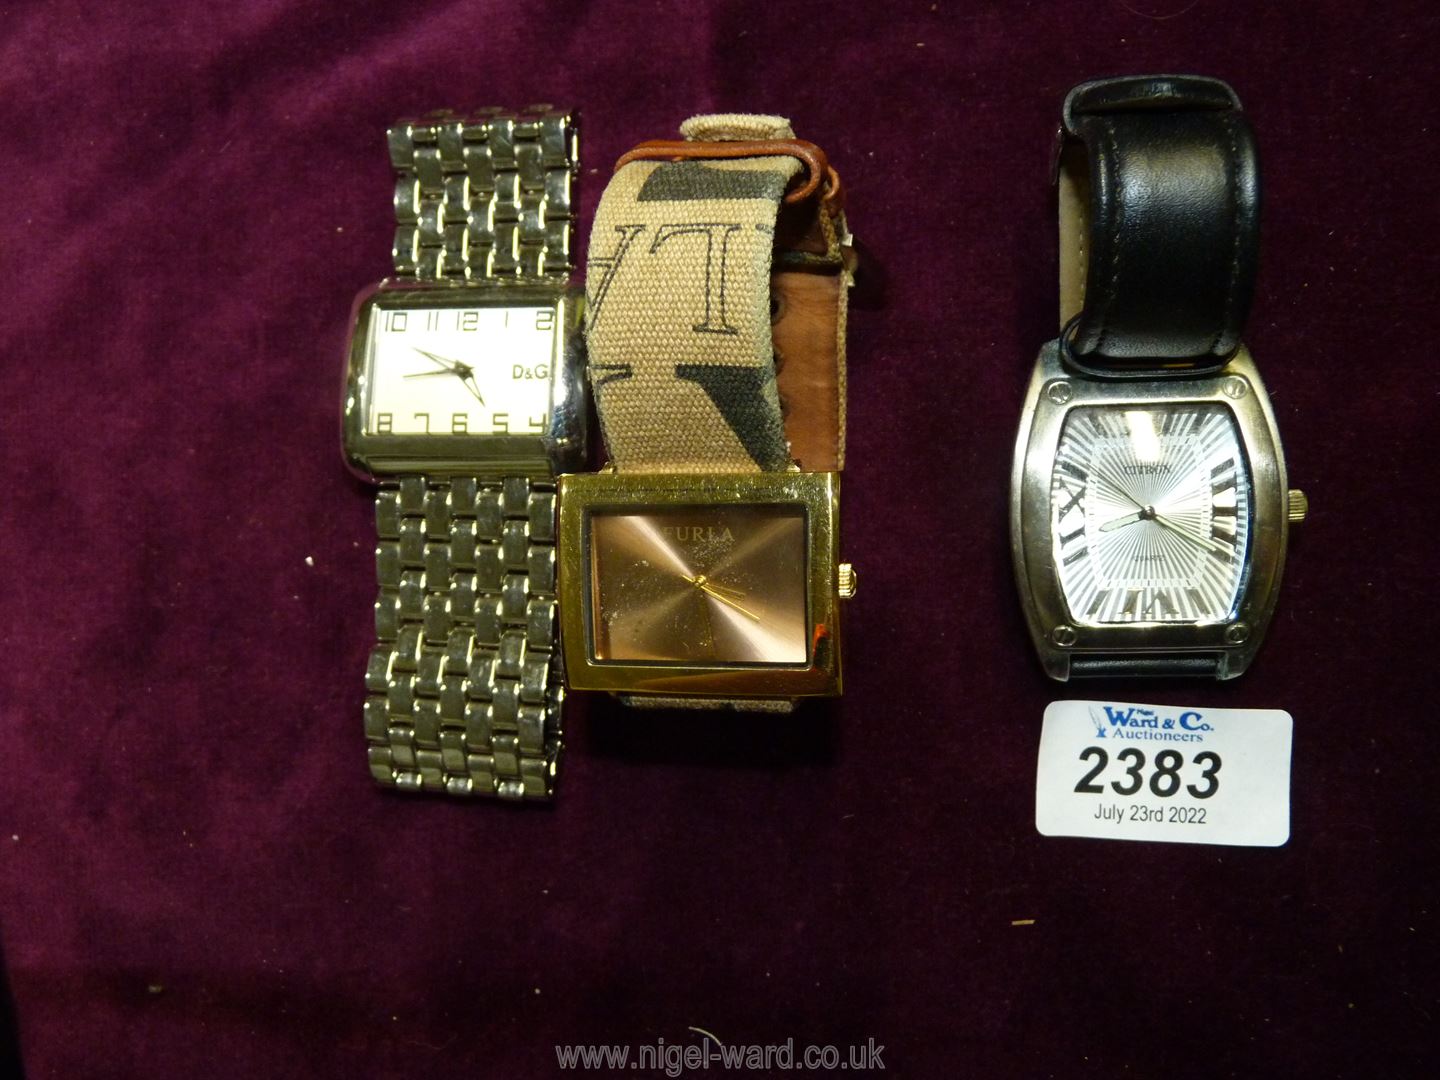 A Furla steel collection watch, D&G square watch and Citron Quartz gents watch.